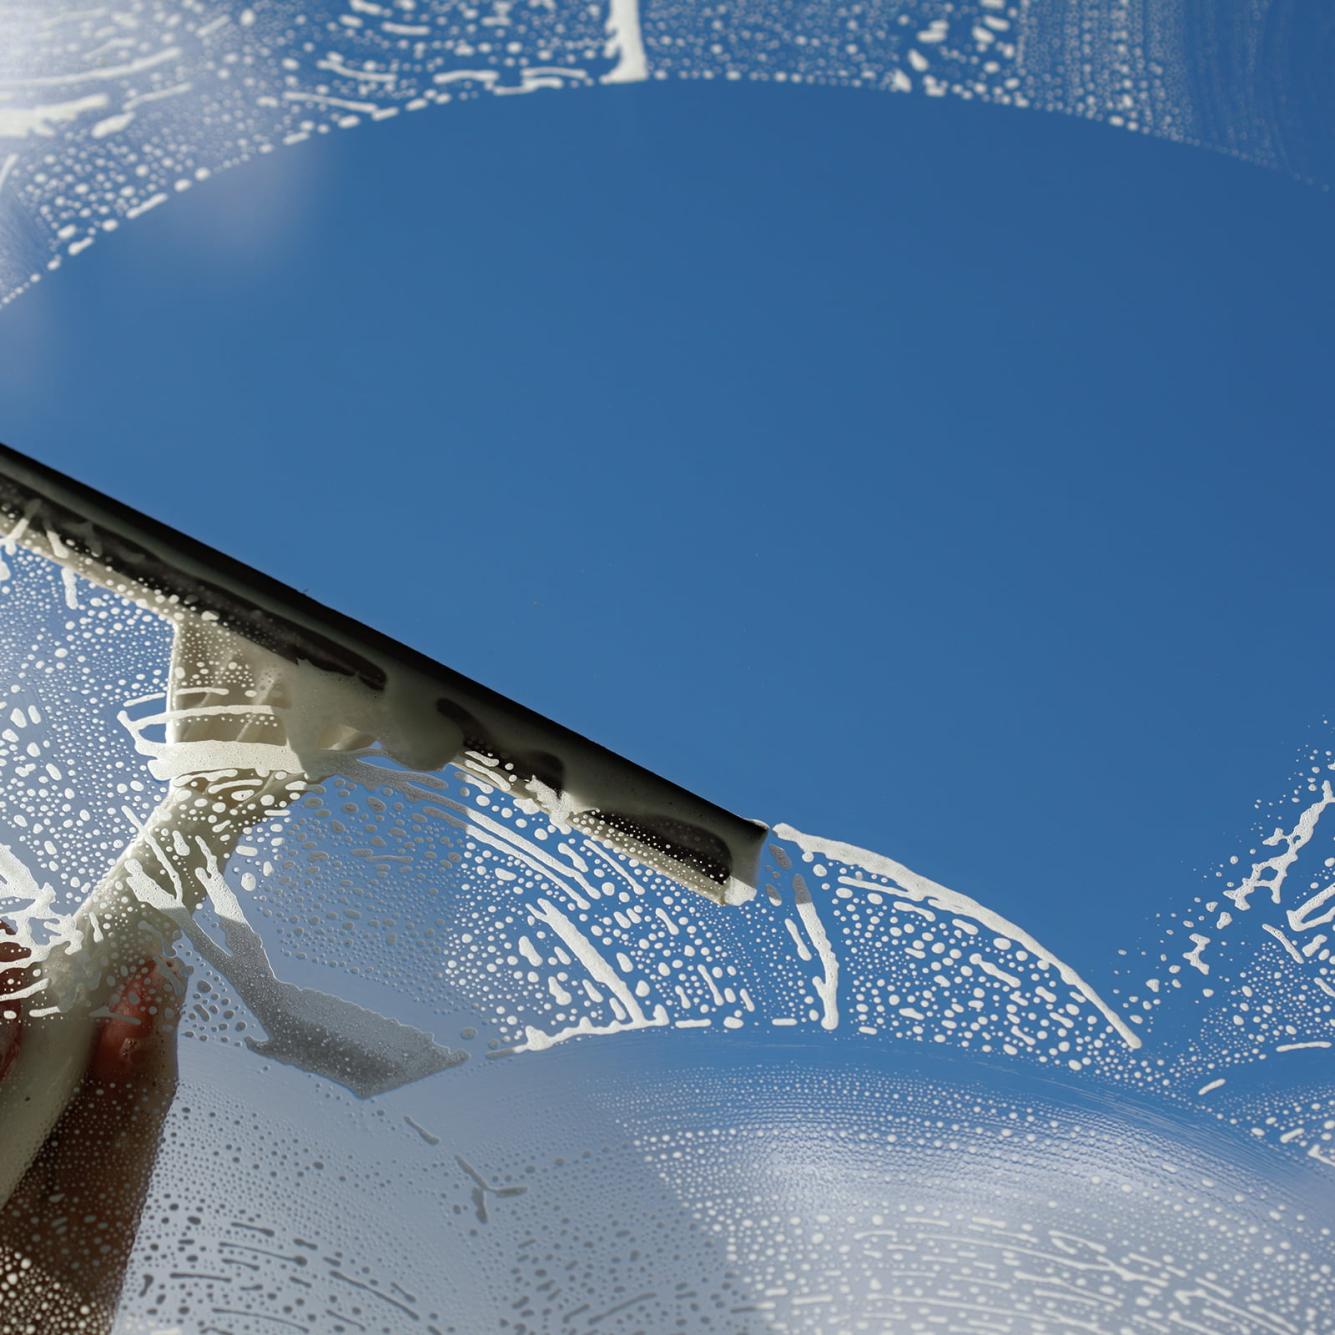 How to Find a Reputable Window Cleaning Company